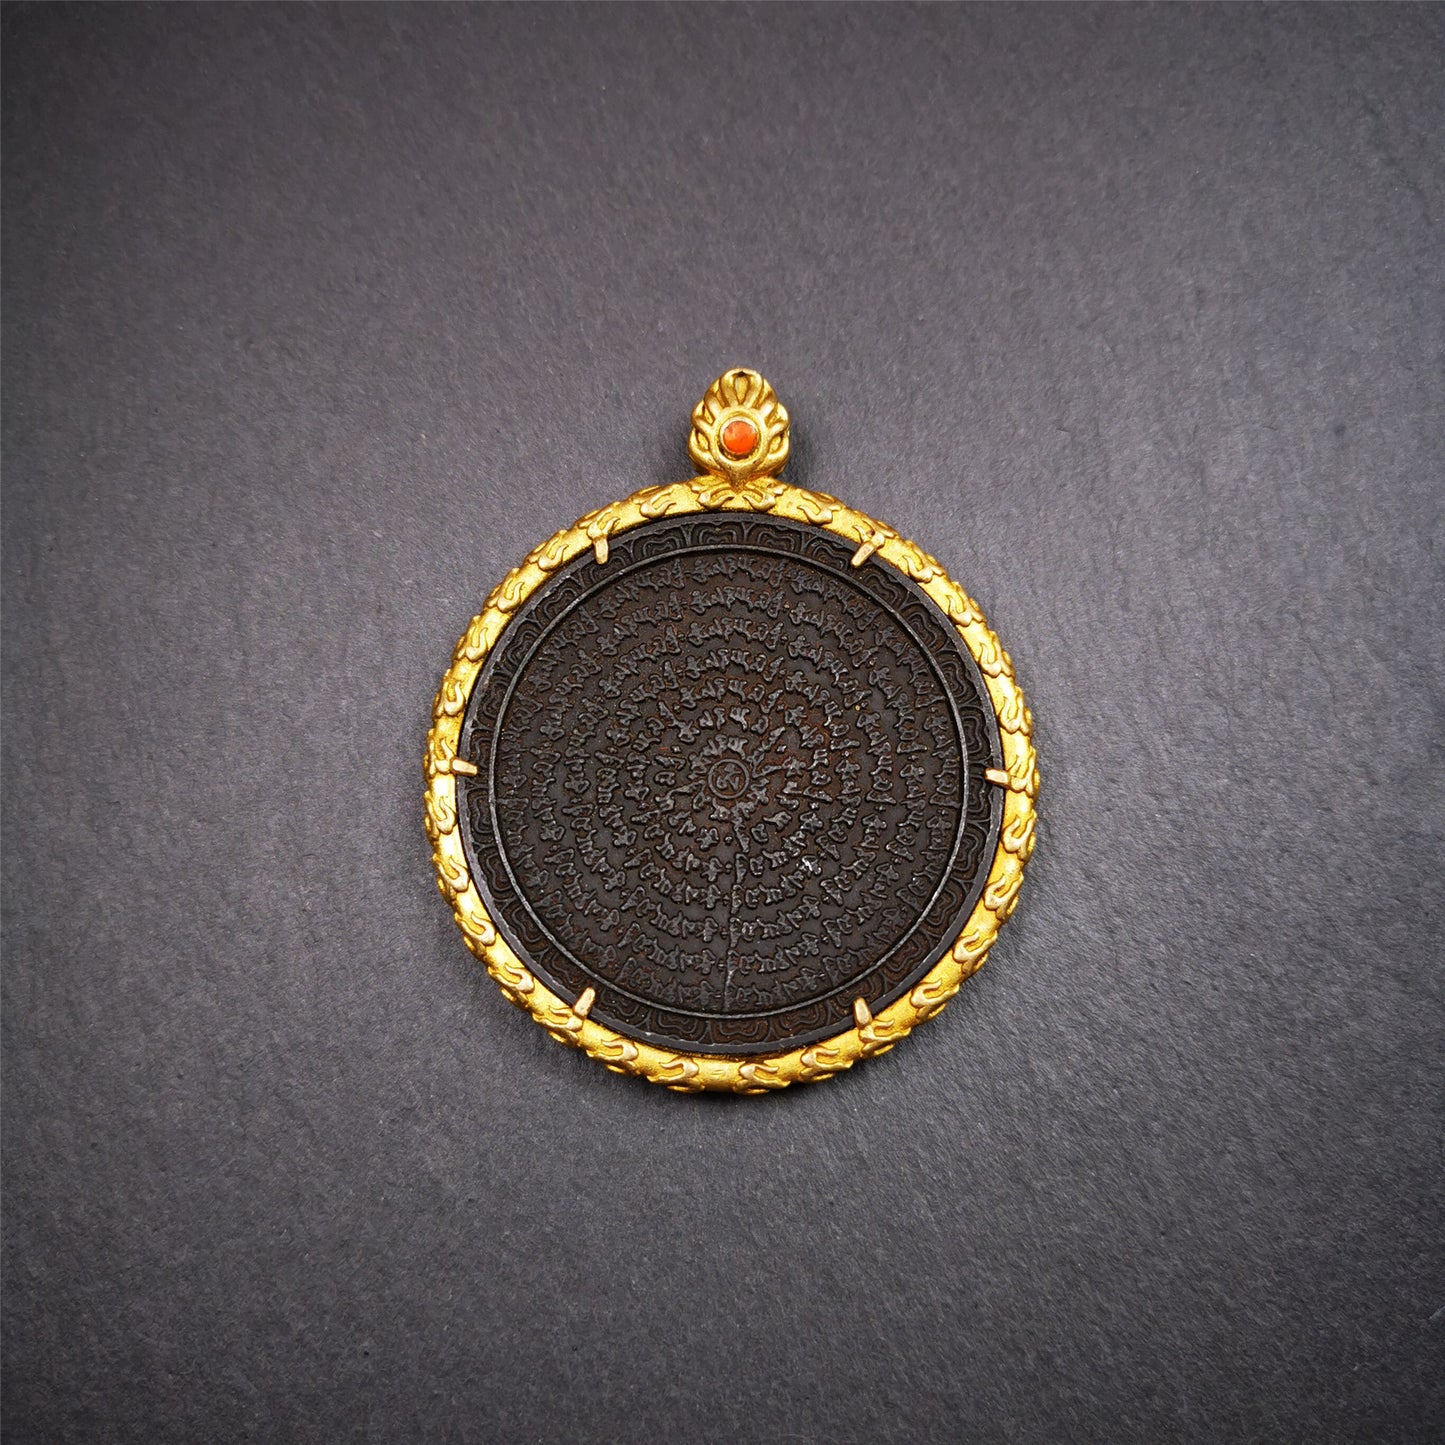 This badge is made by Tibetan craftsmen and come from Hepo Town, Baiyu County,Tibet. It is made of thokcha, edging with copper,round shape, 2.52 inche diameter. The OM MANI PADME HUM mantra arranged in concentric circles.